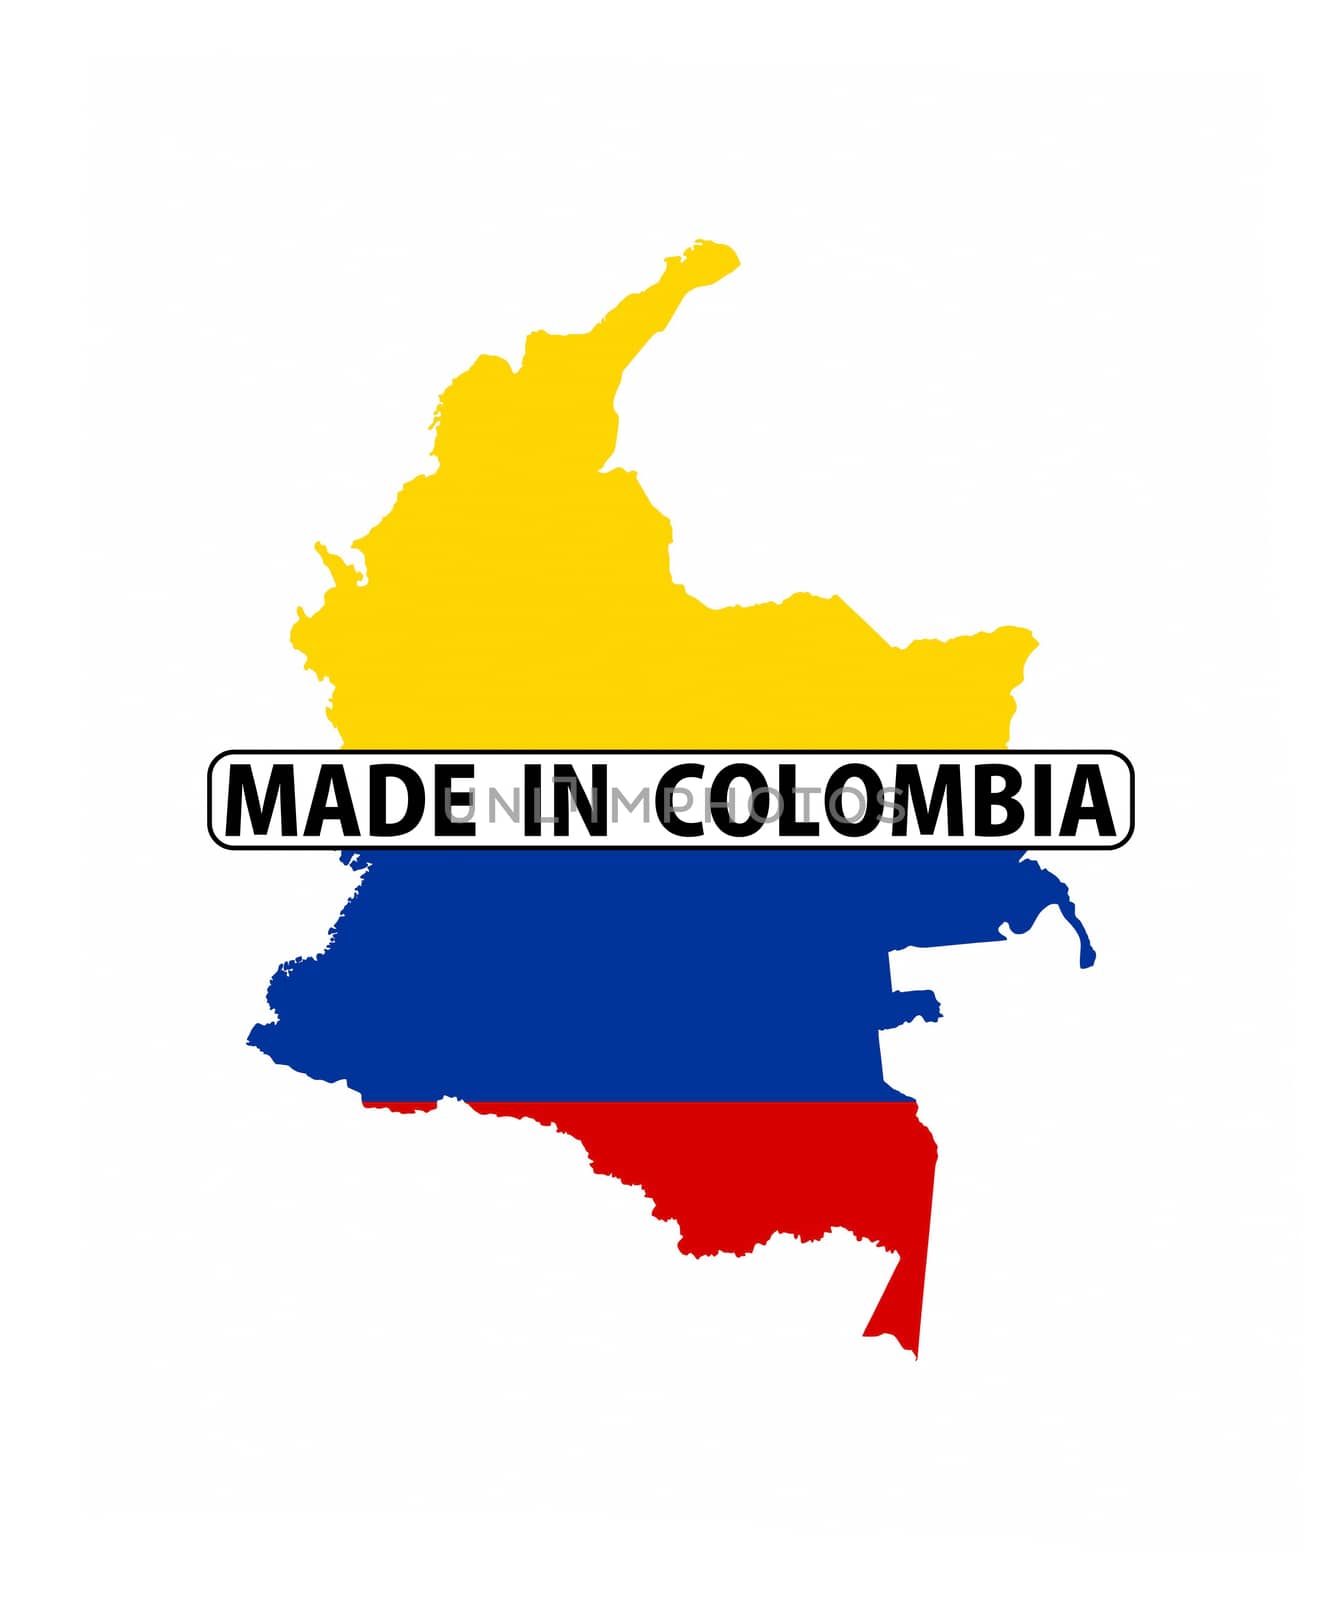 made in colombia by tony4urban